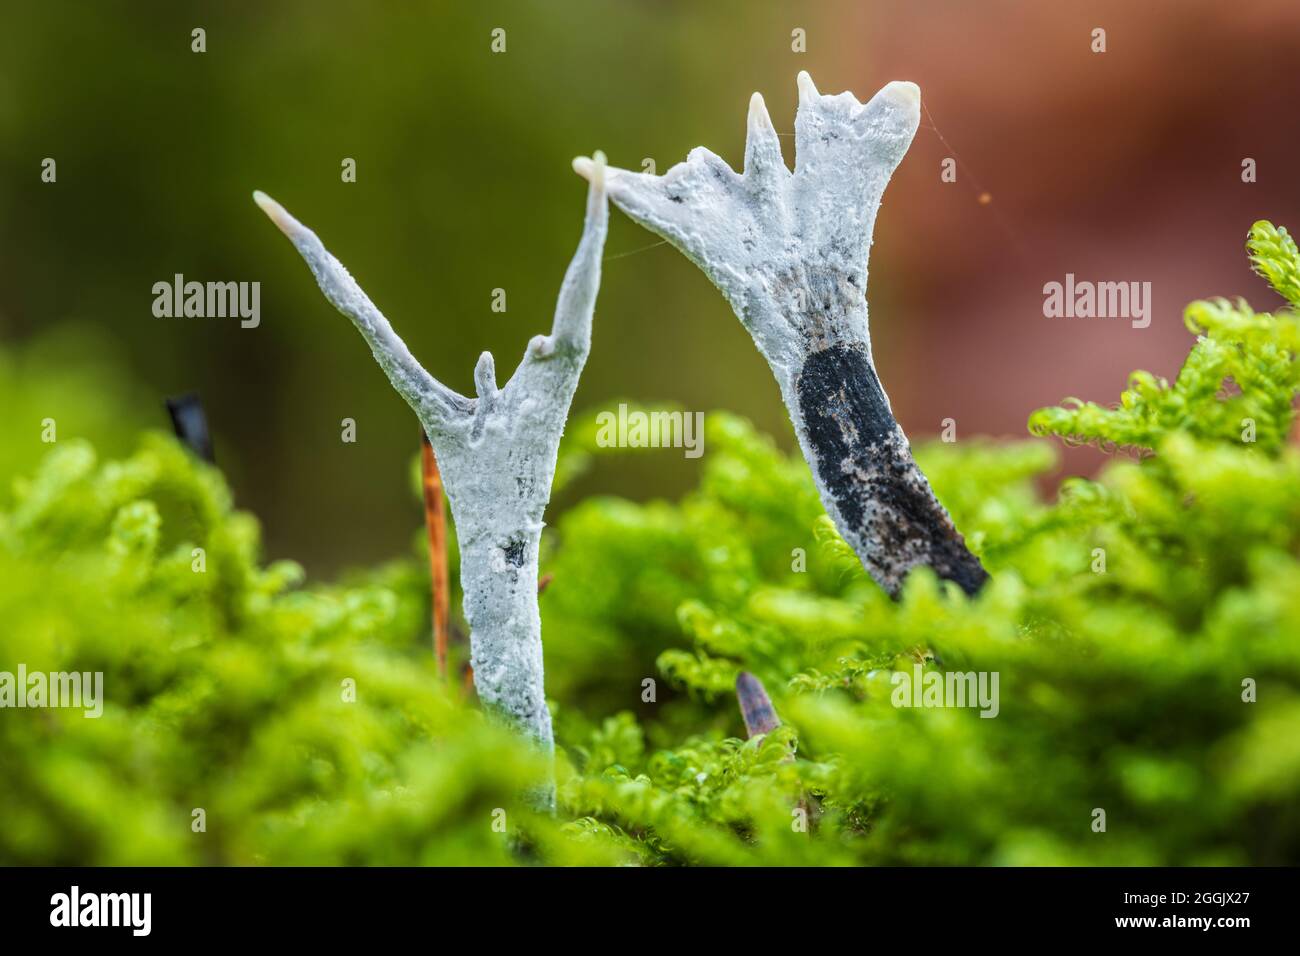 candle-snuff fungus, Xylaria hypoxylon, close-up Stock Photo